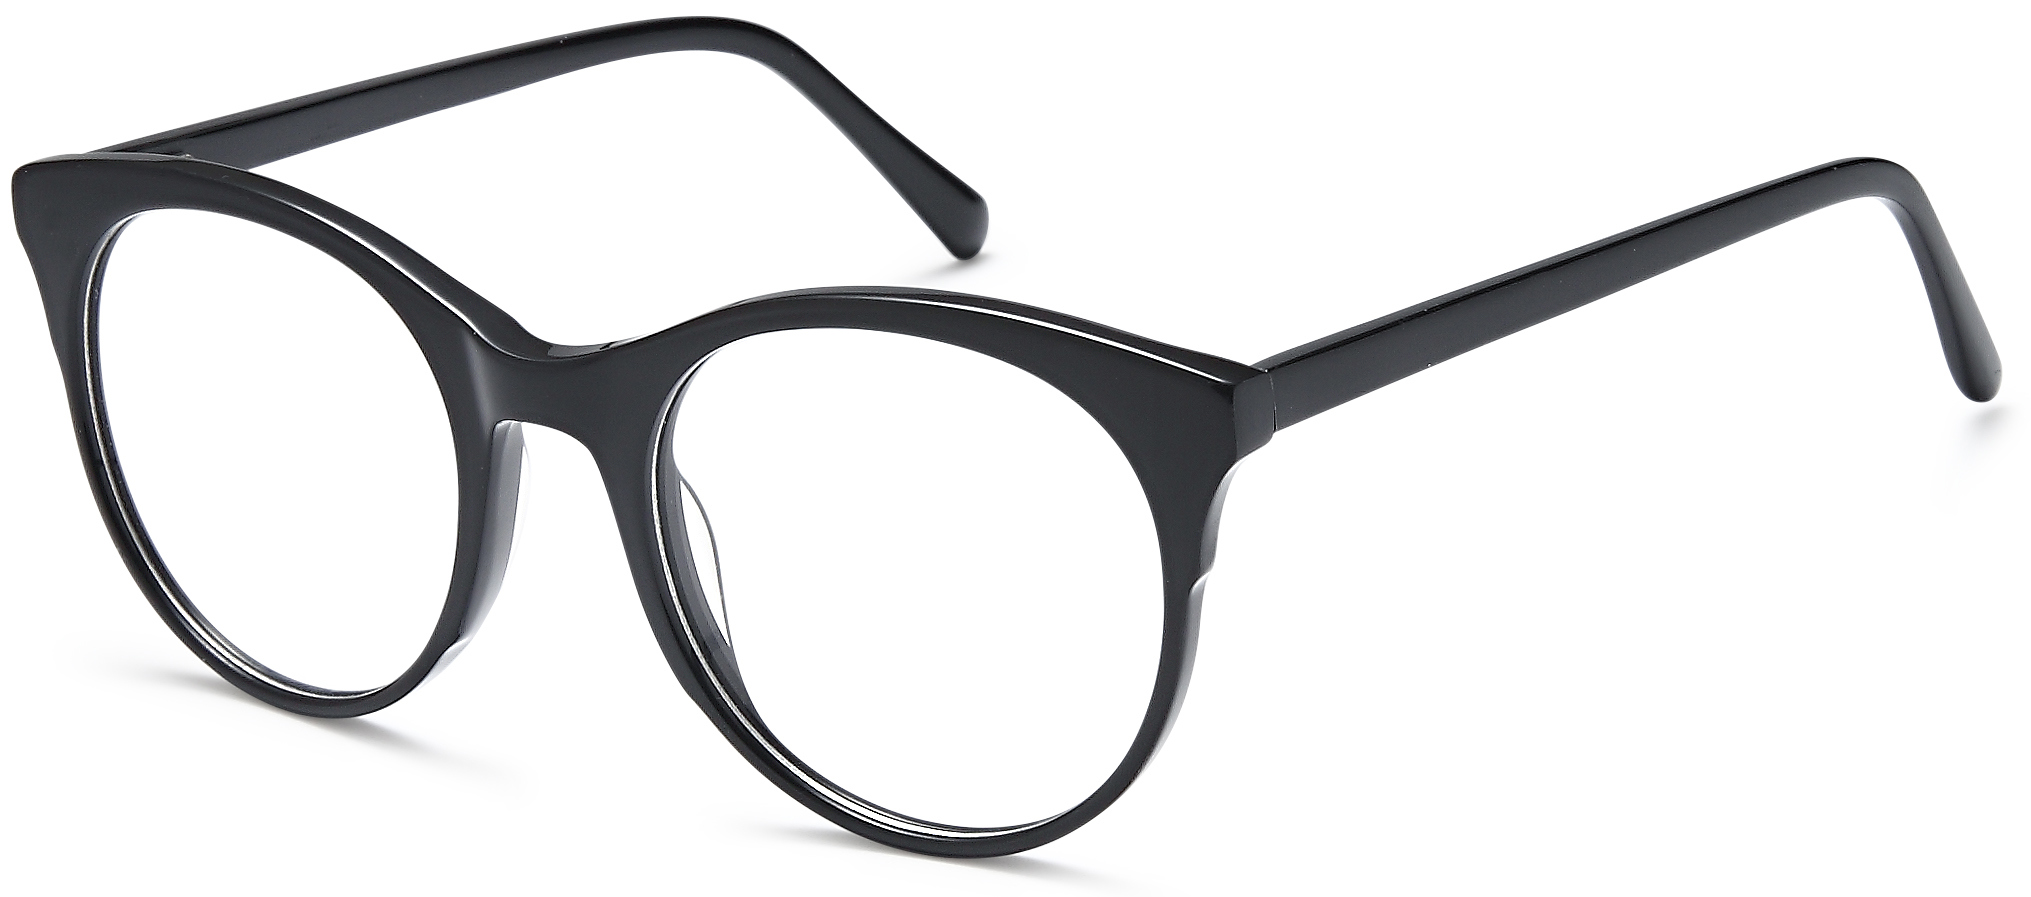 Picture of Candy Shoppe Eyeglasses 21102